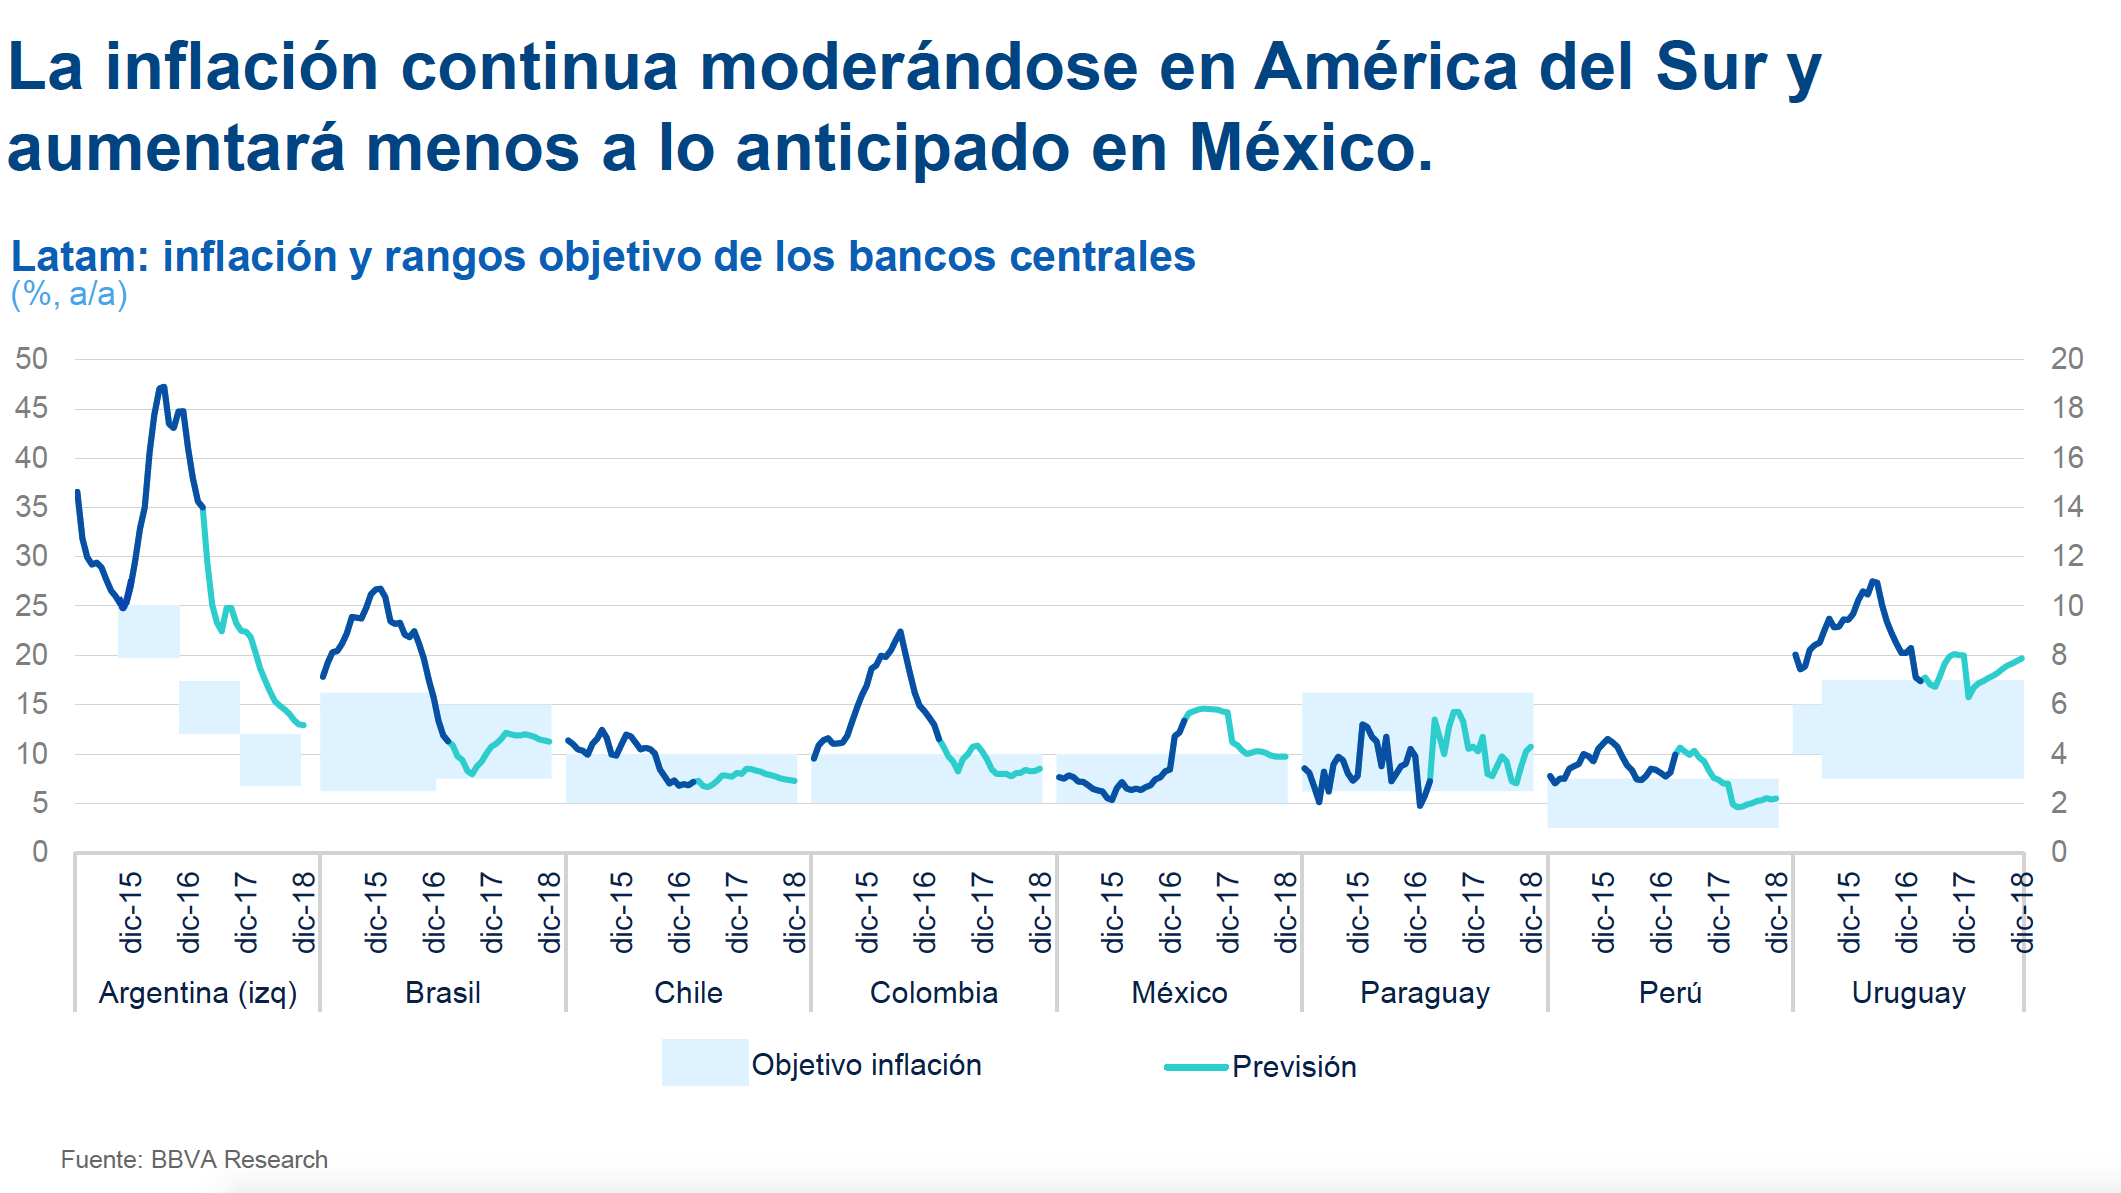 picture of forecast gdp latin america south mexico bbva research